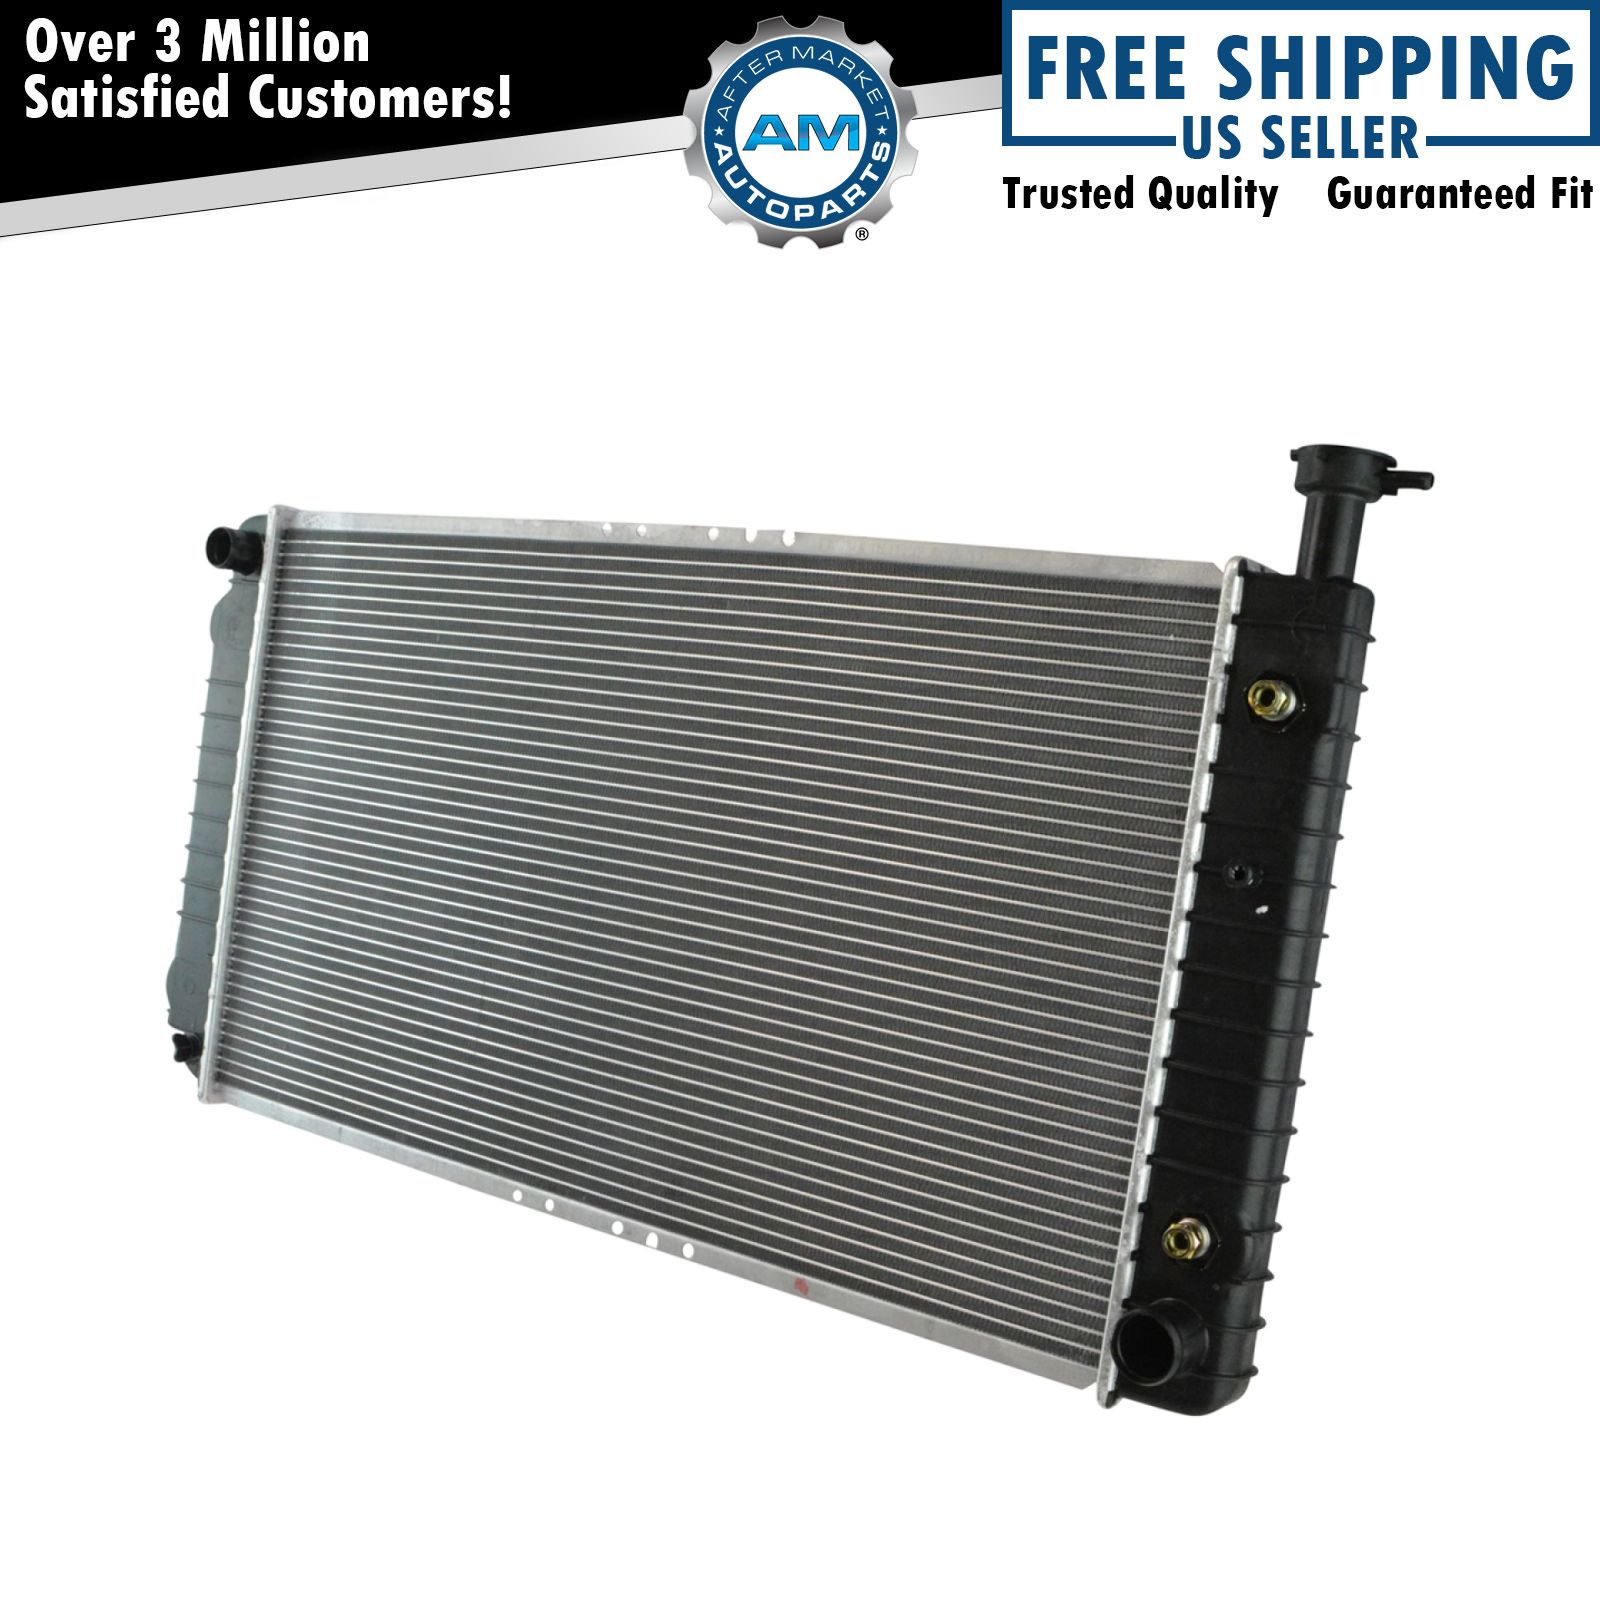 Radiators Assembly Aluminum Core Direct Fit for Chevy GMC Van V8 New